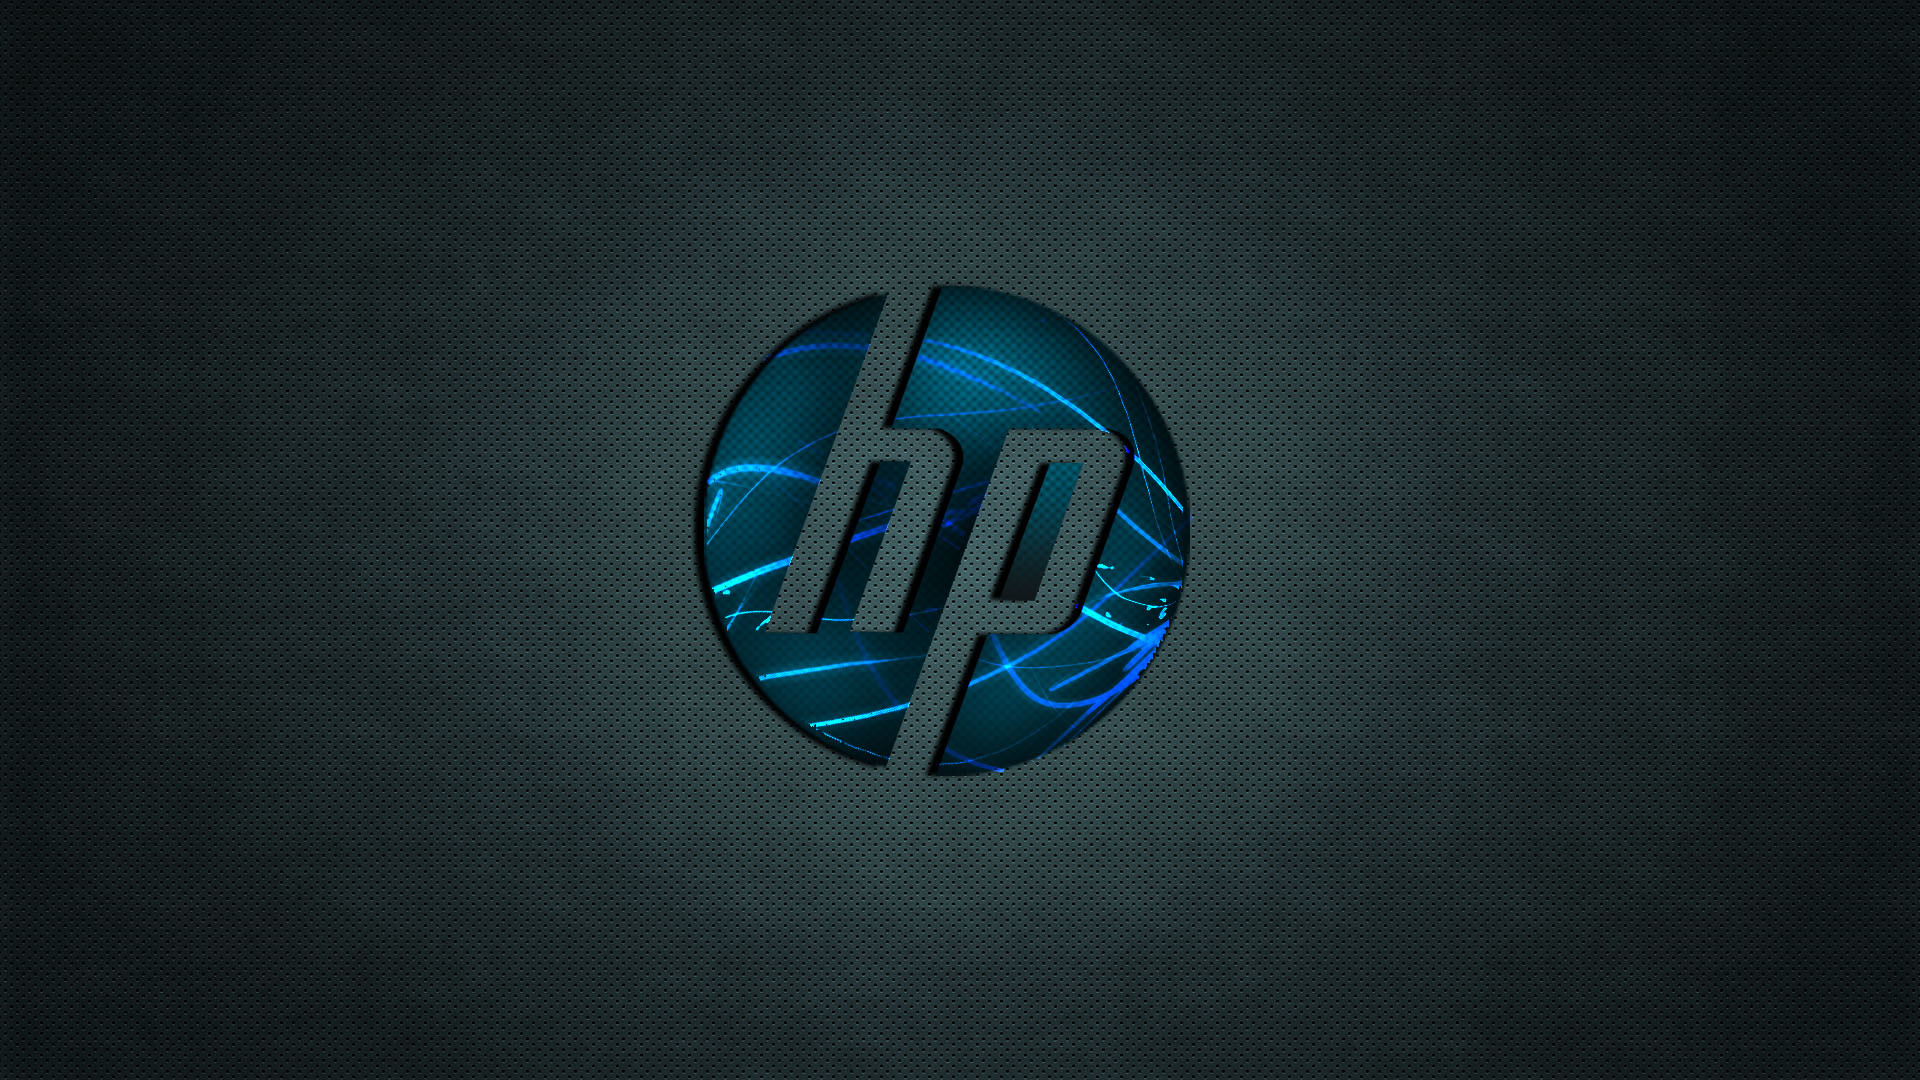 1920x1080 Wallpaper Goes Black: ... wallpapers are still related to wallpaper hp .